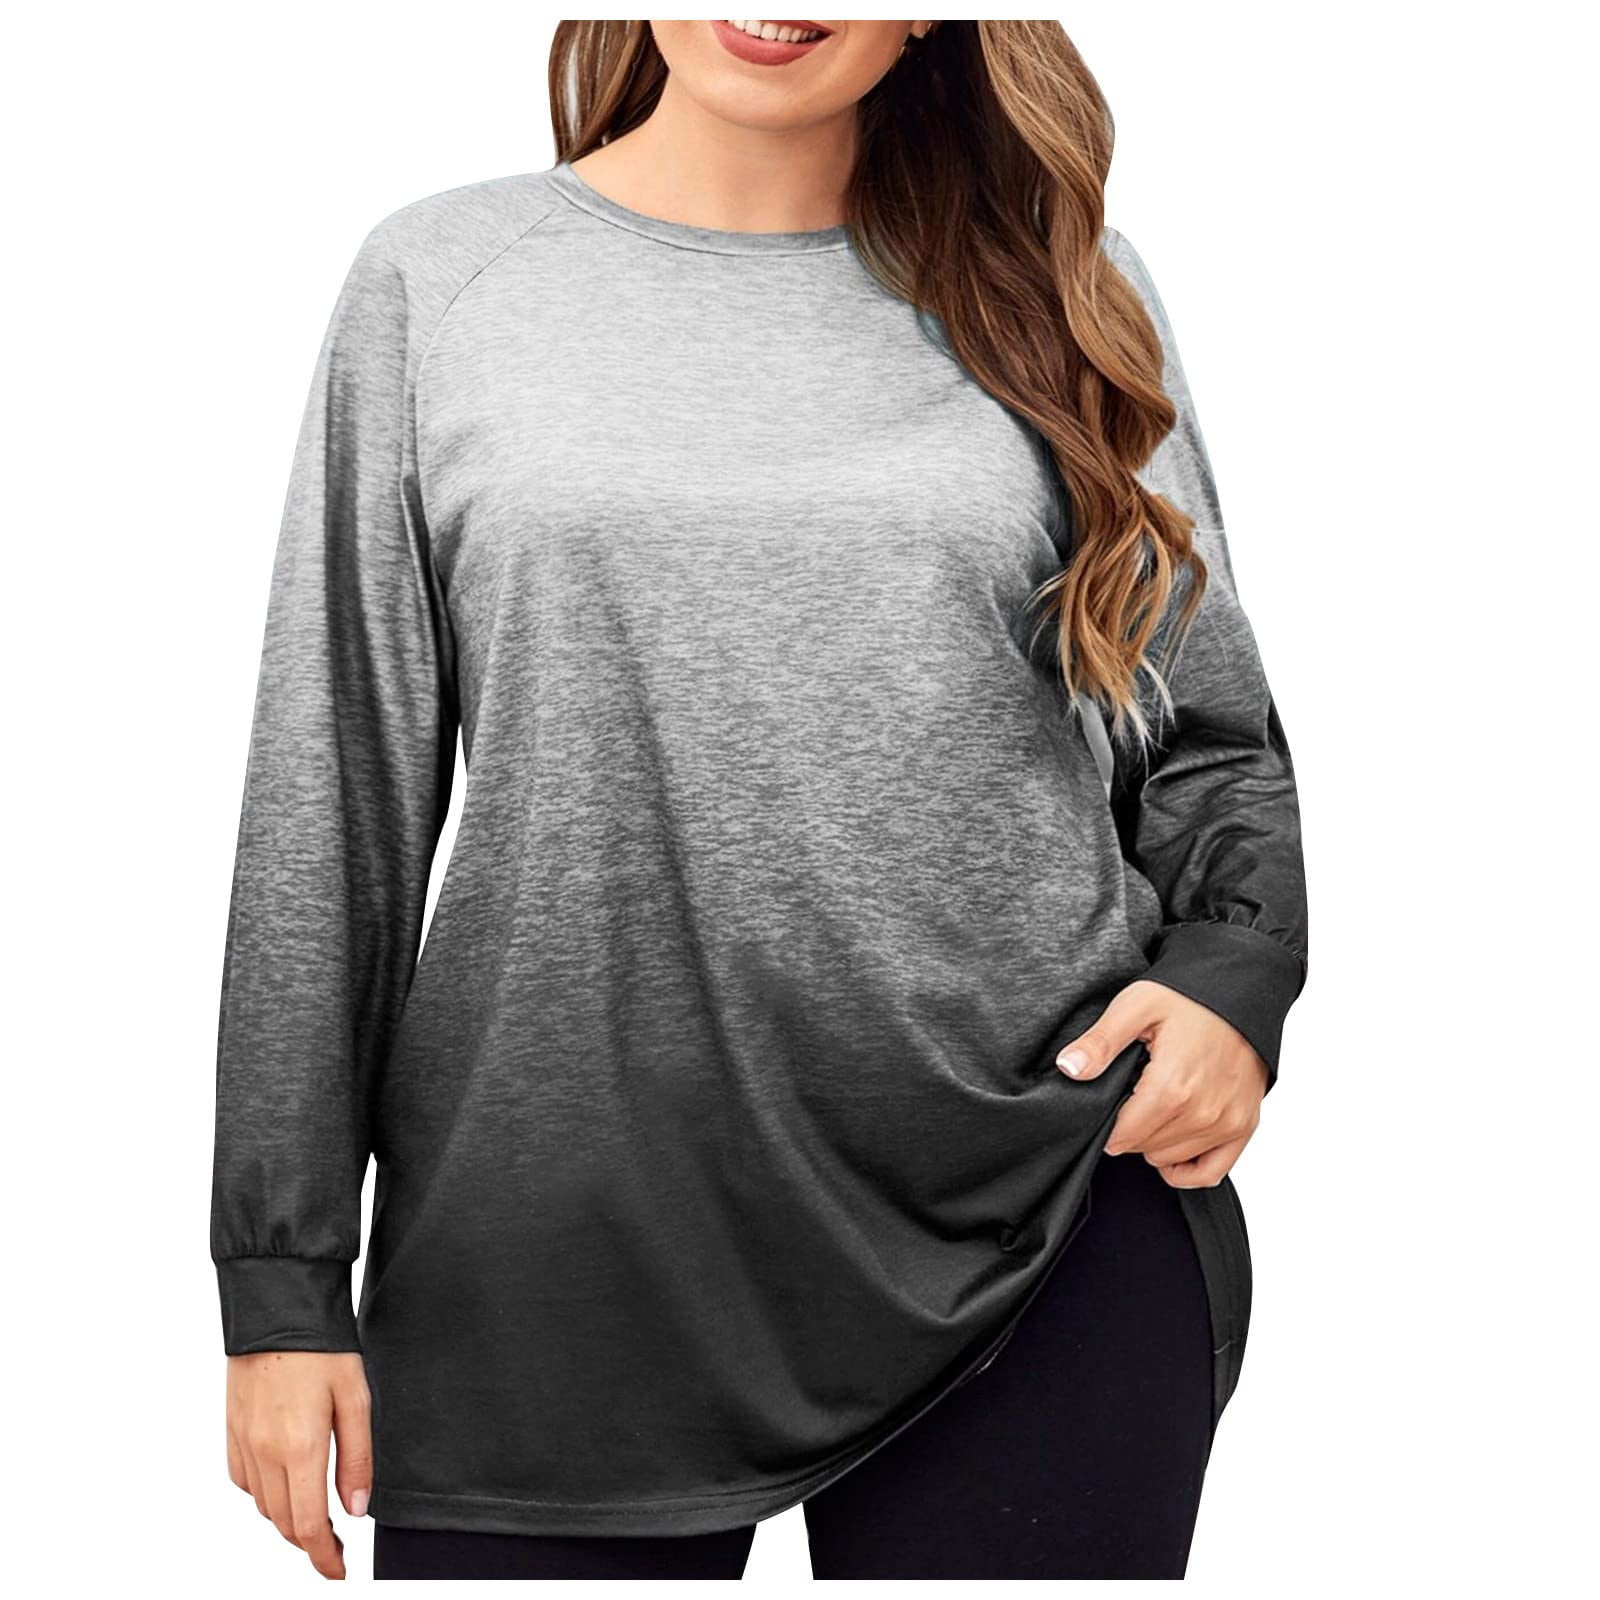 ⭐Plus Size Womens Ladies Lace Tops T Shirts Crew Neck Pleated Pullover Blouse